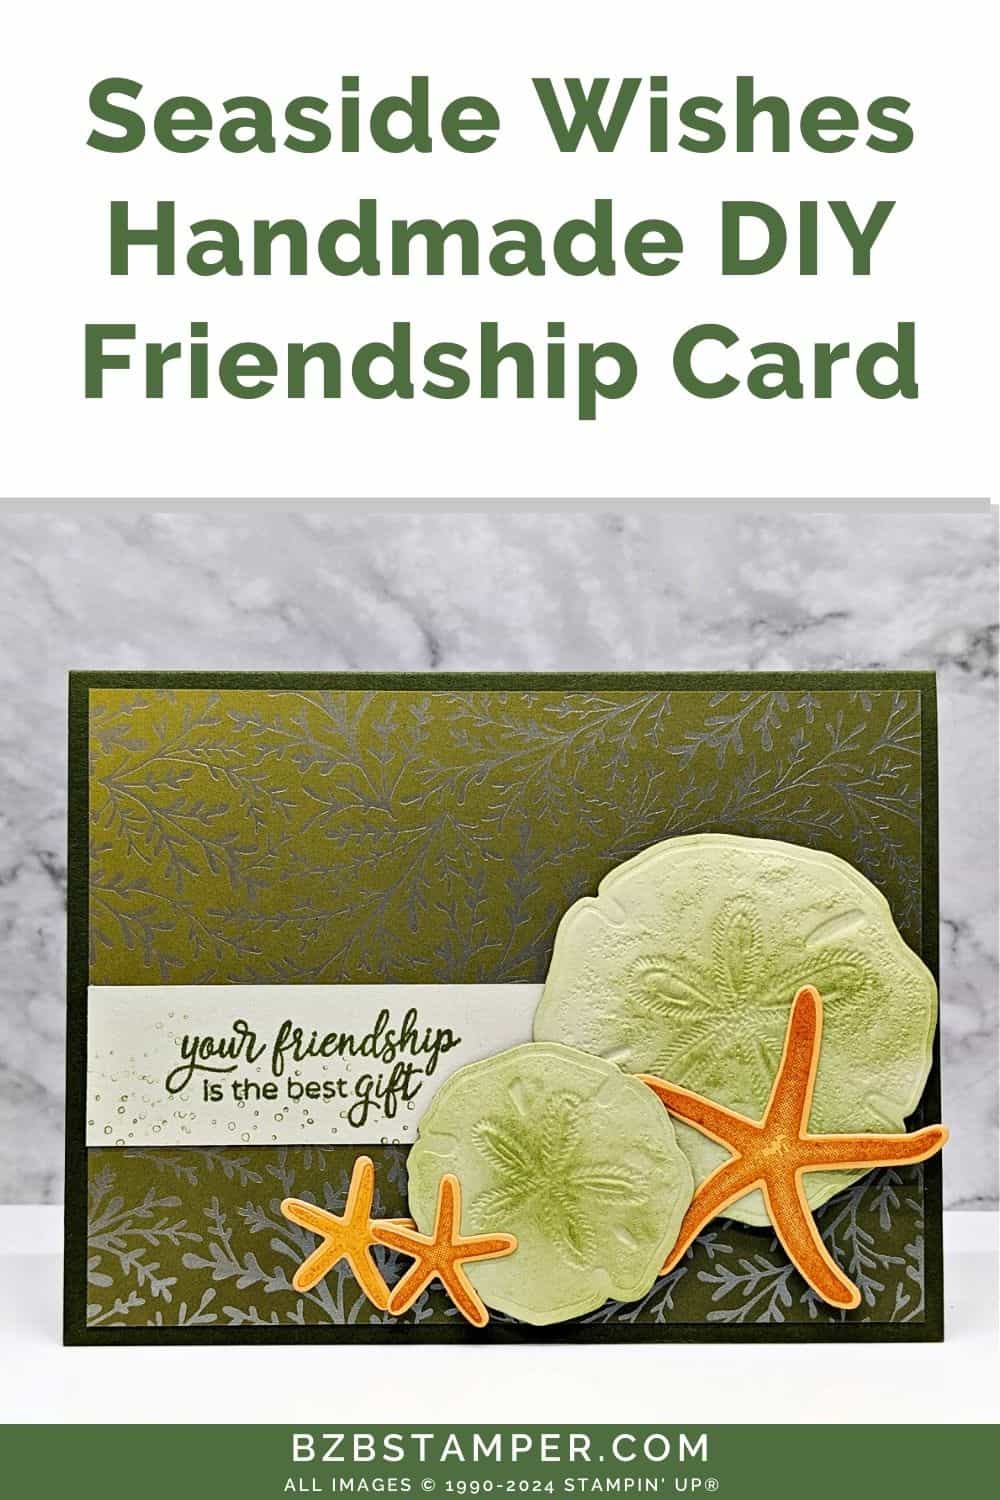 Handmade Seaside Wishes Friendship Card featuring seashells and starfish with pretty paper background.  Sentimet is "your friendship is the best gift."